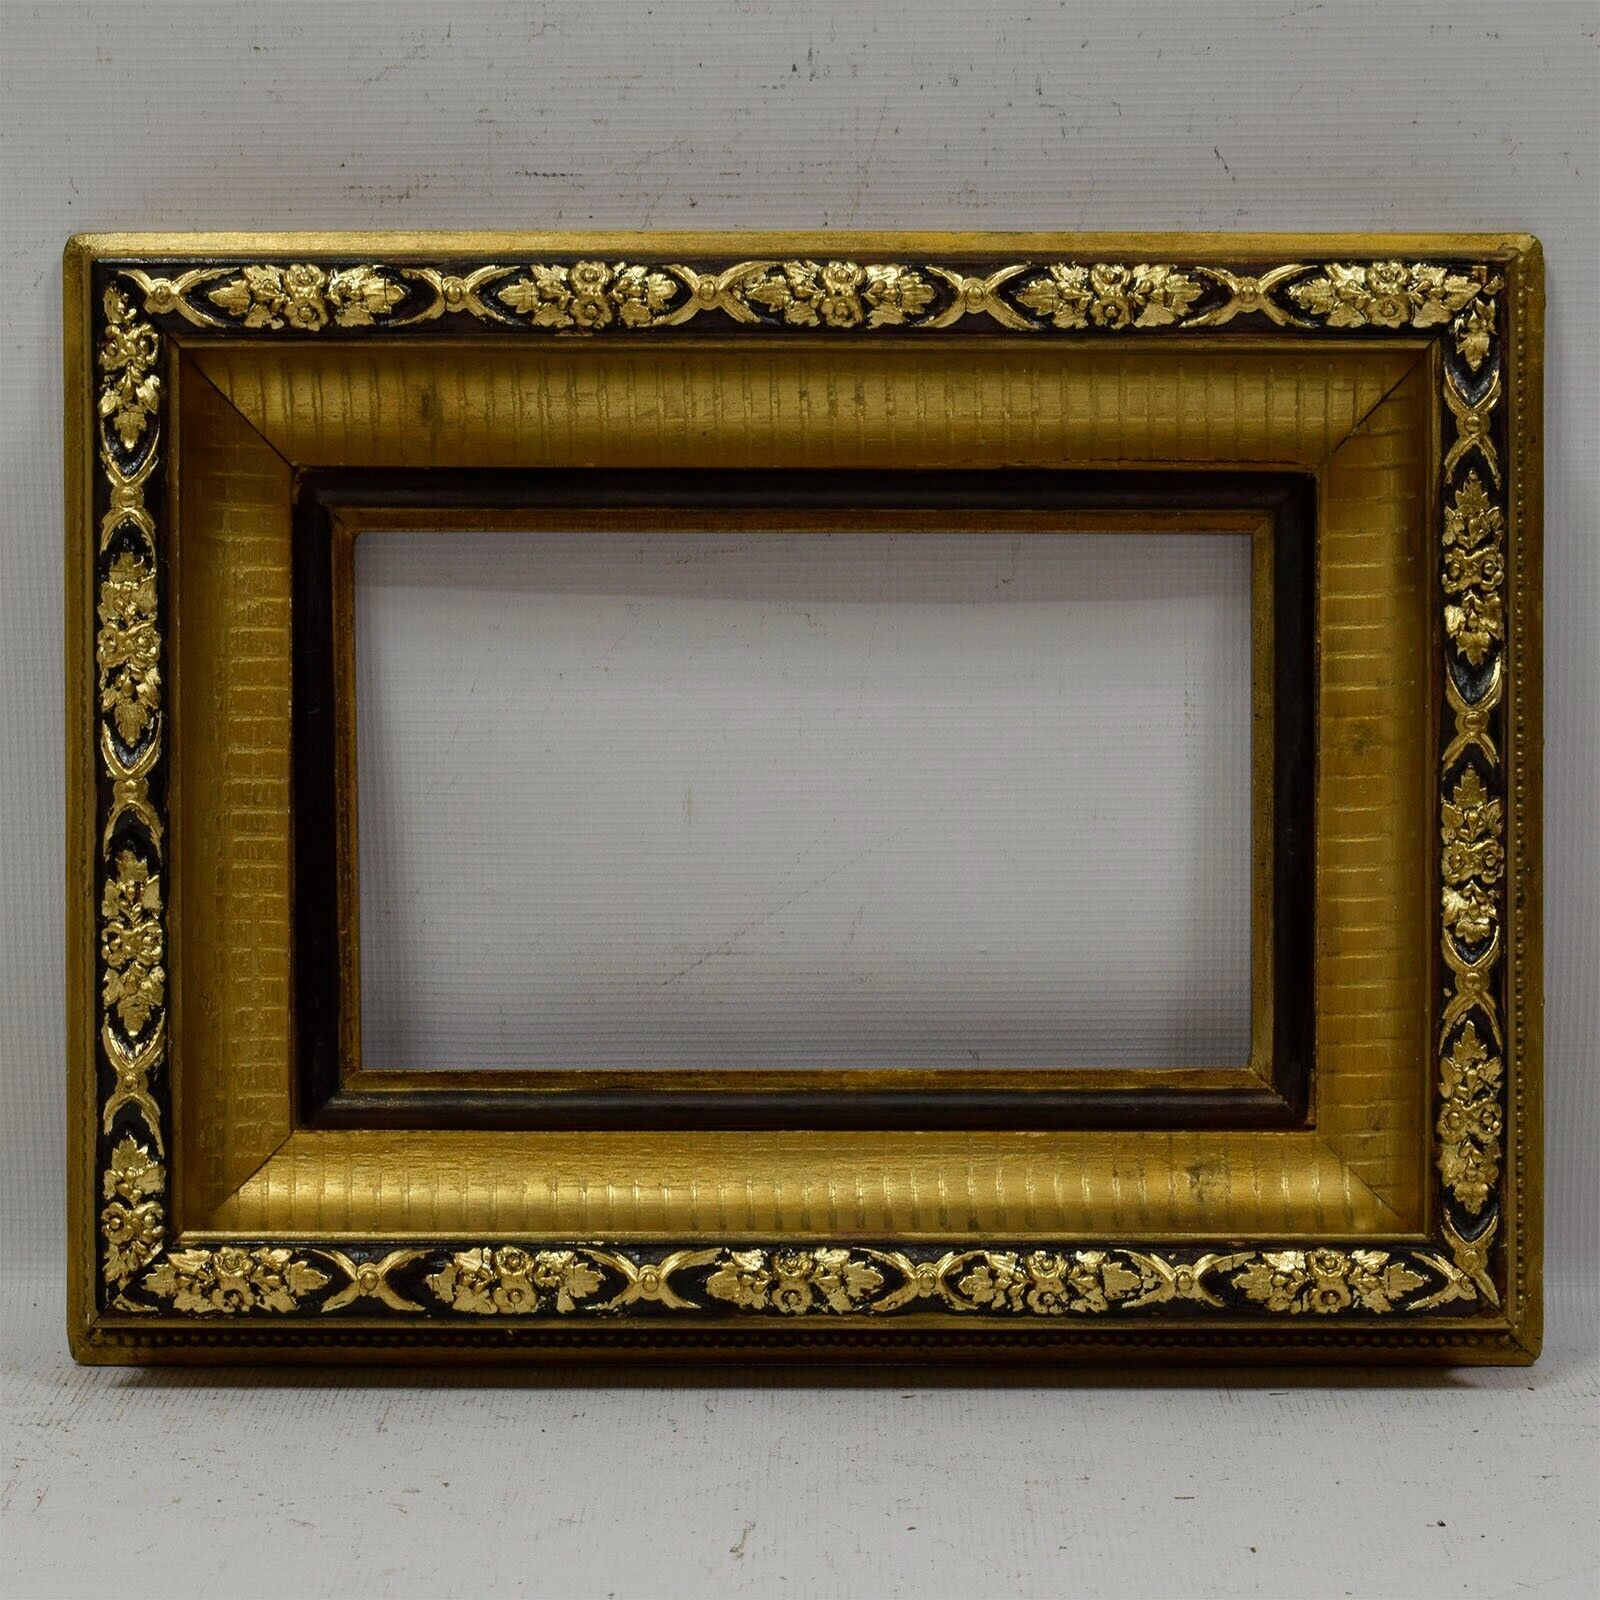 Ca. 1900-1930 Old wooden frame decorative with metal leaf Internal: 11.4x6,8 in